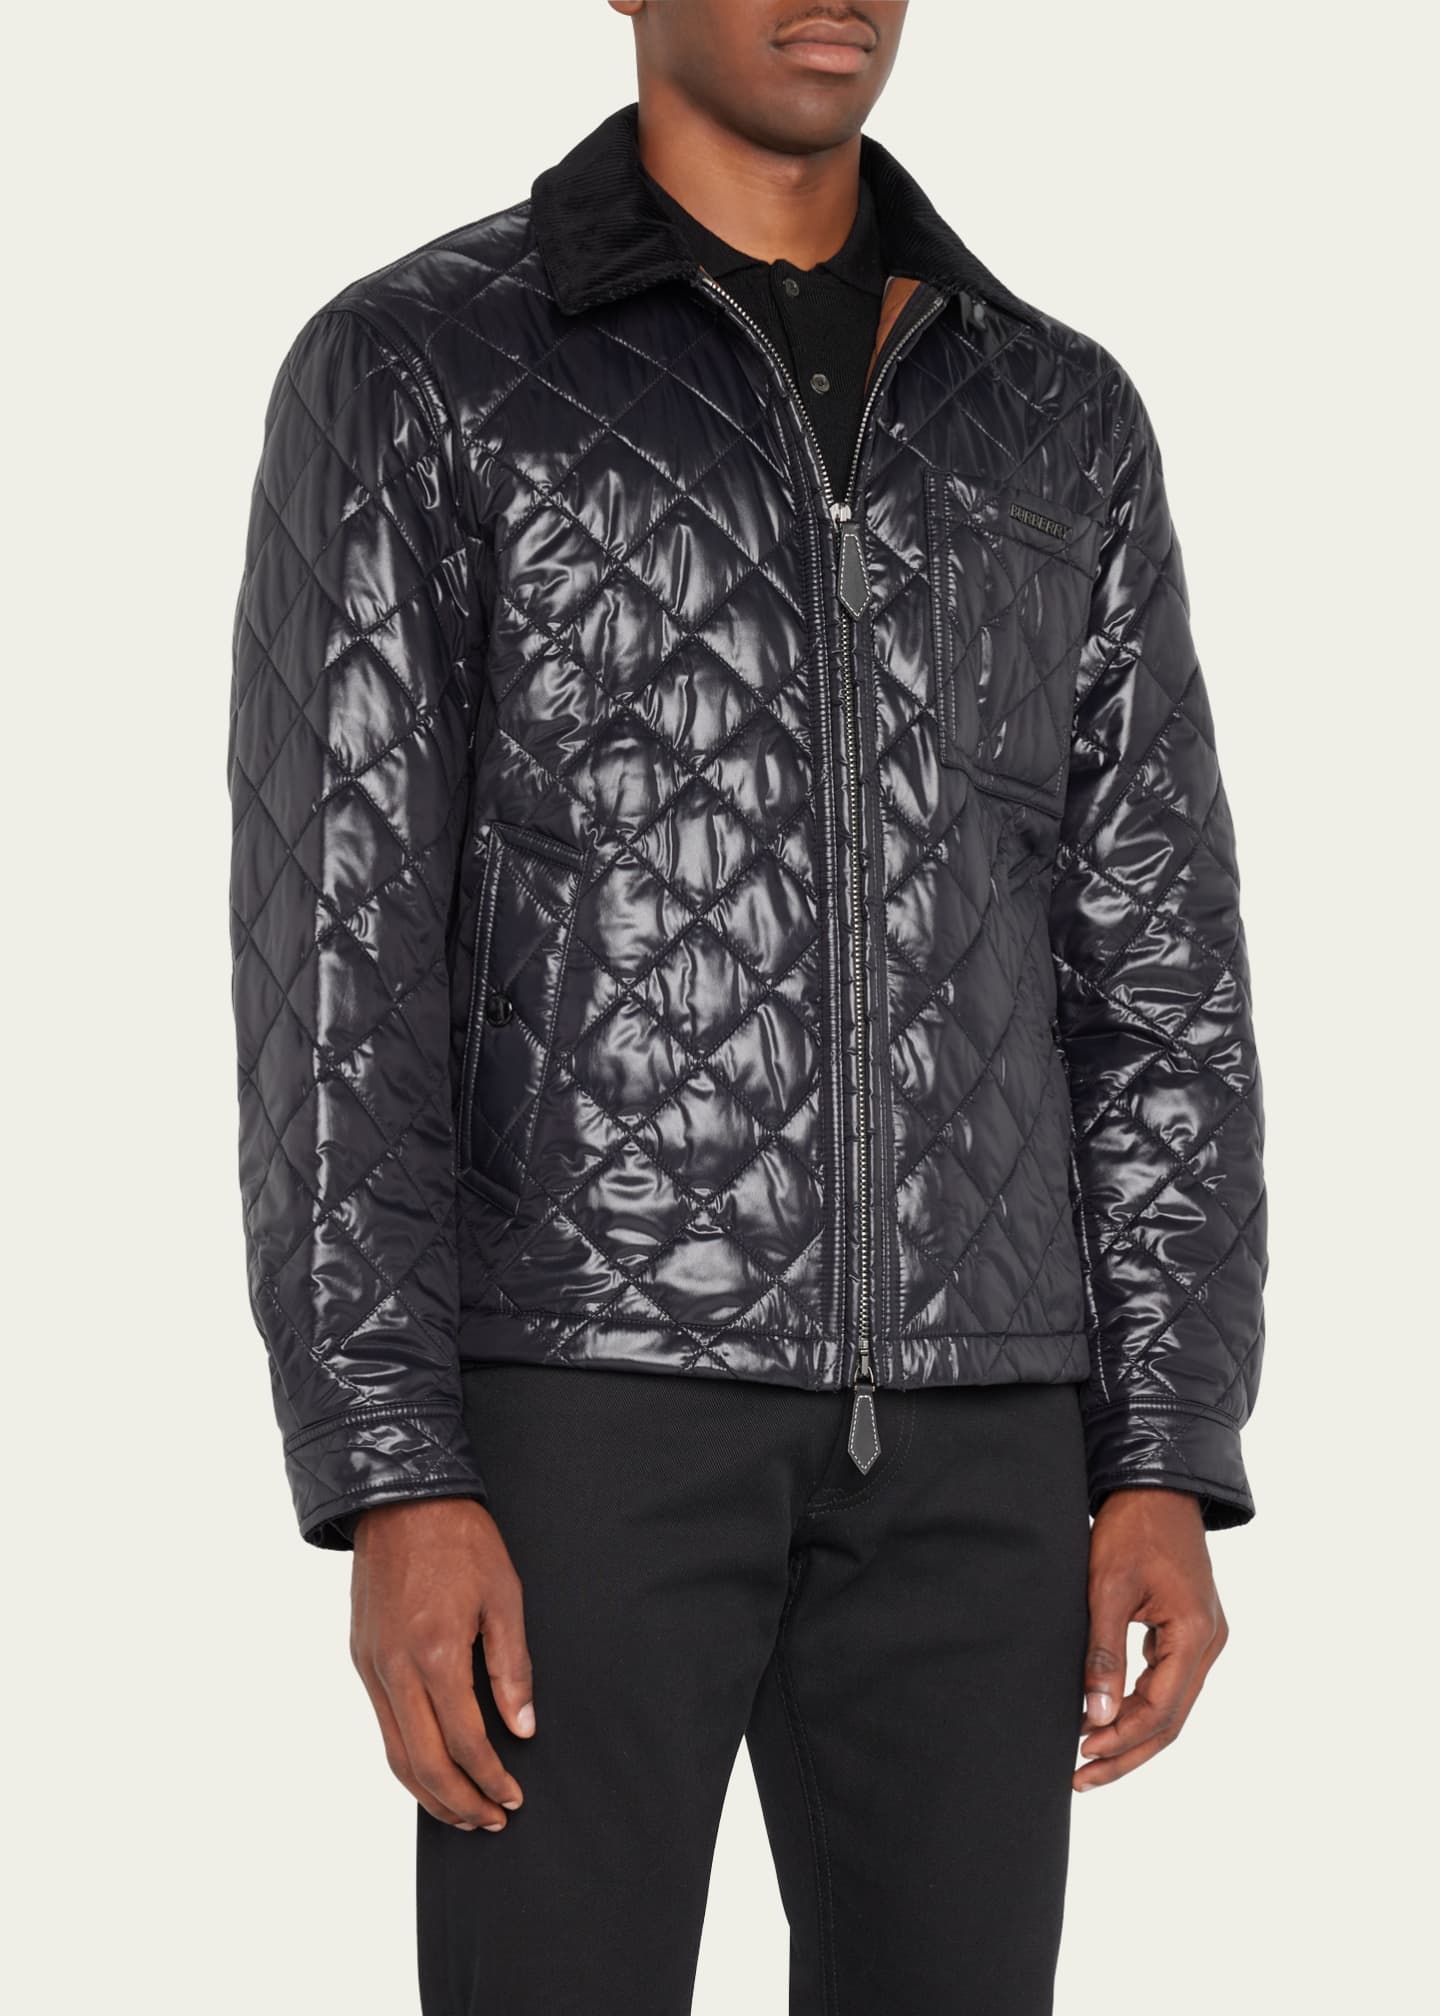 Burberry Men's Wanson Lacquered Quilted Jacket - Bergdorf Goodman